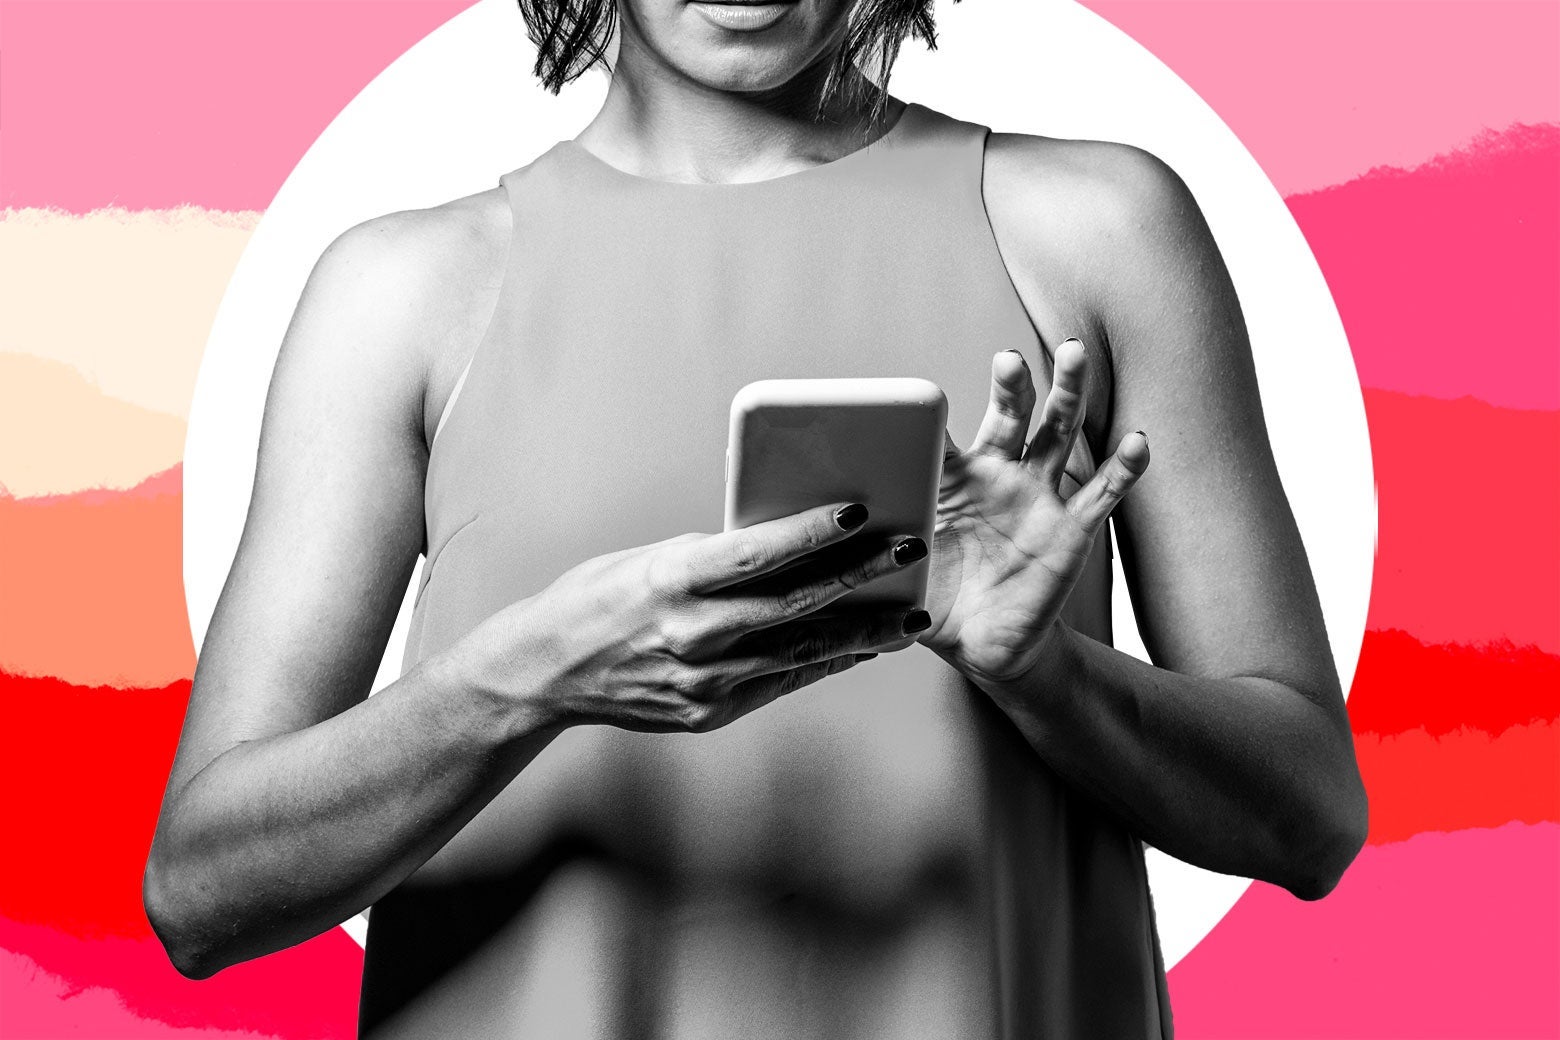 The torso of a person holding a smartphone and tapping it.